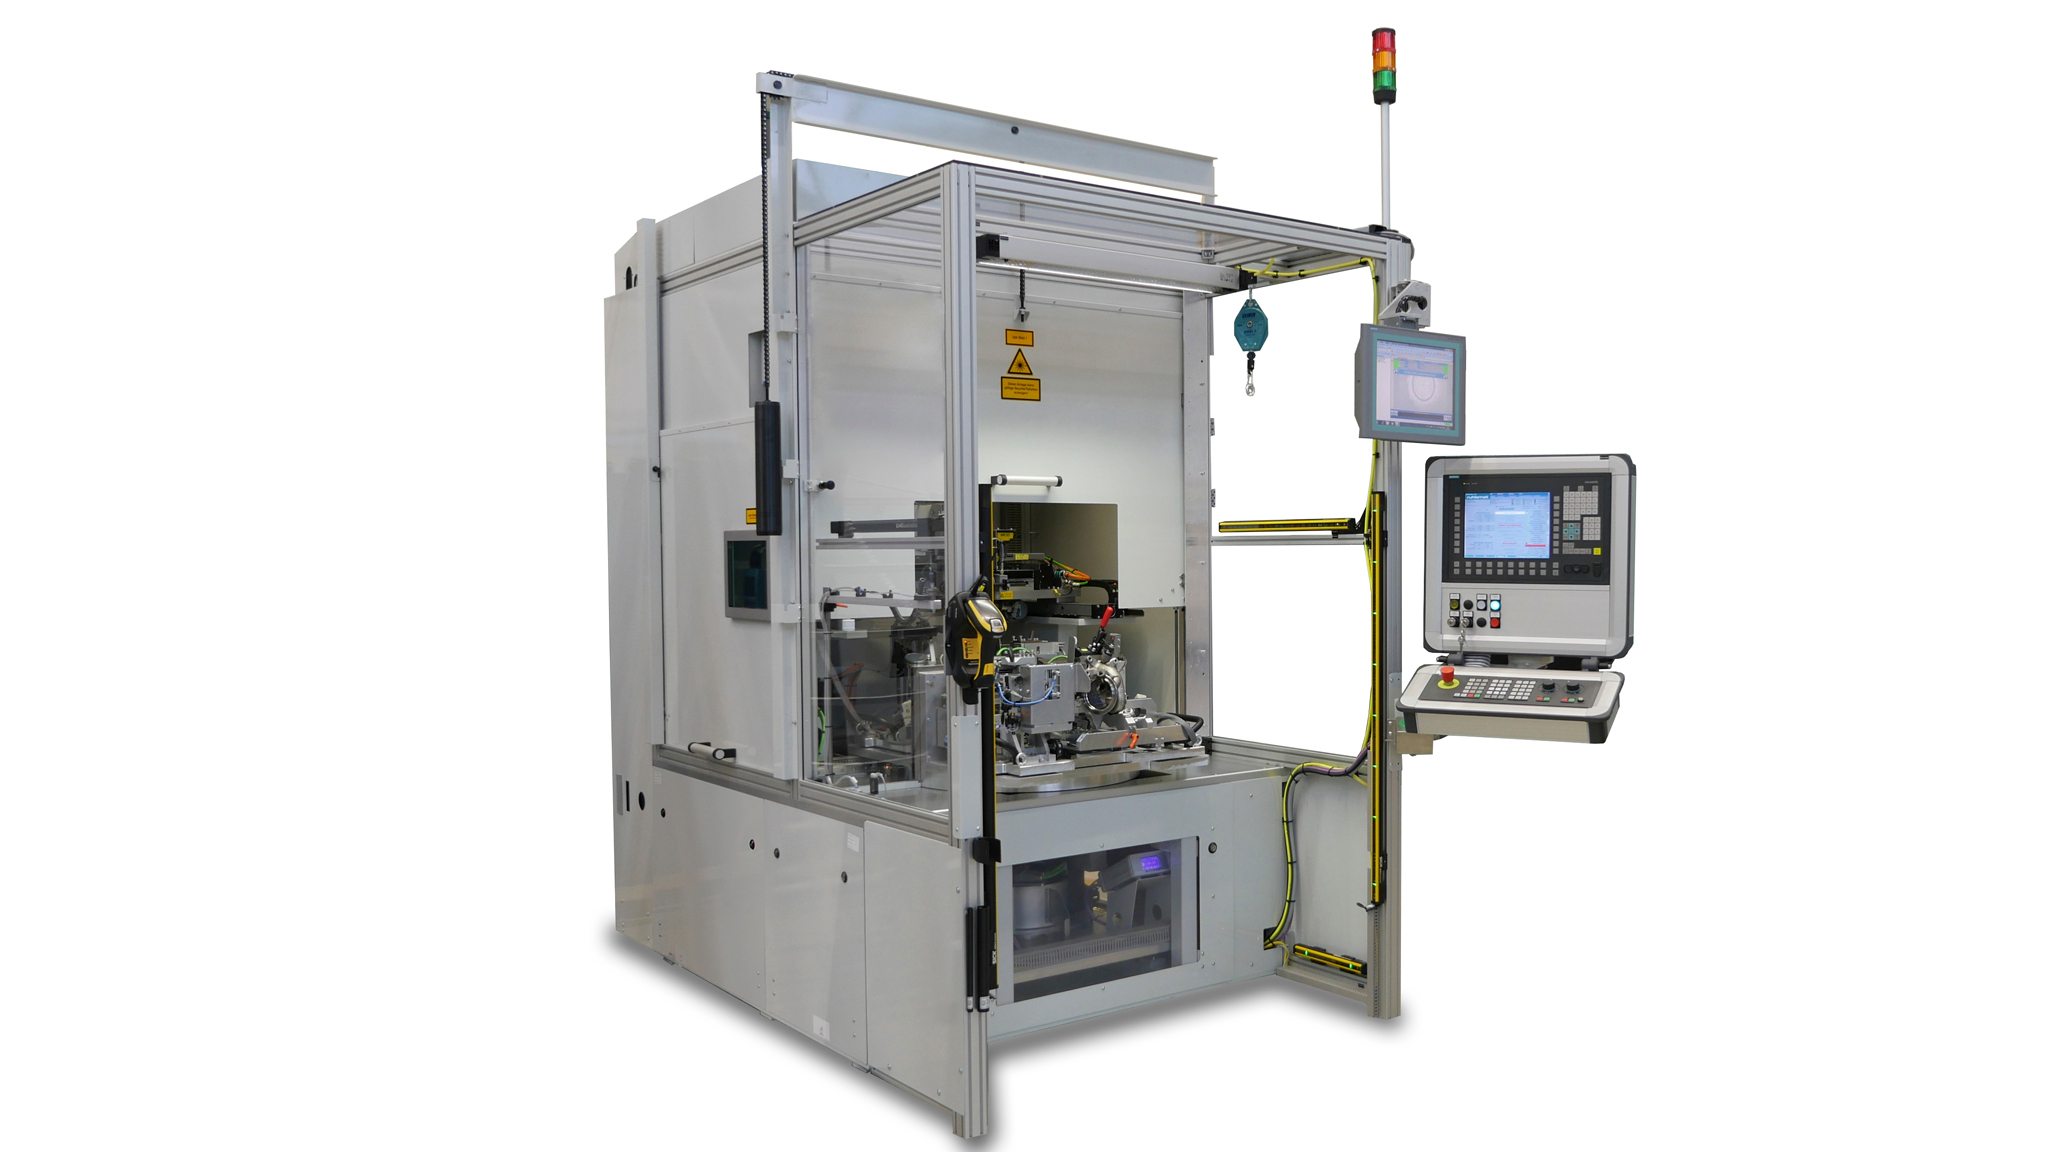 Product Stations for laser welding of plastic parts from the supplier ruhlamat